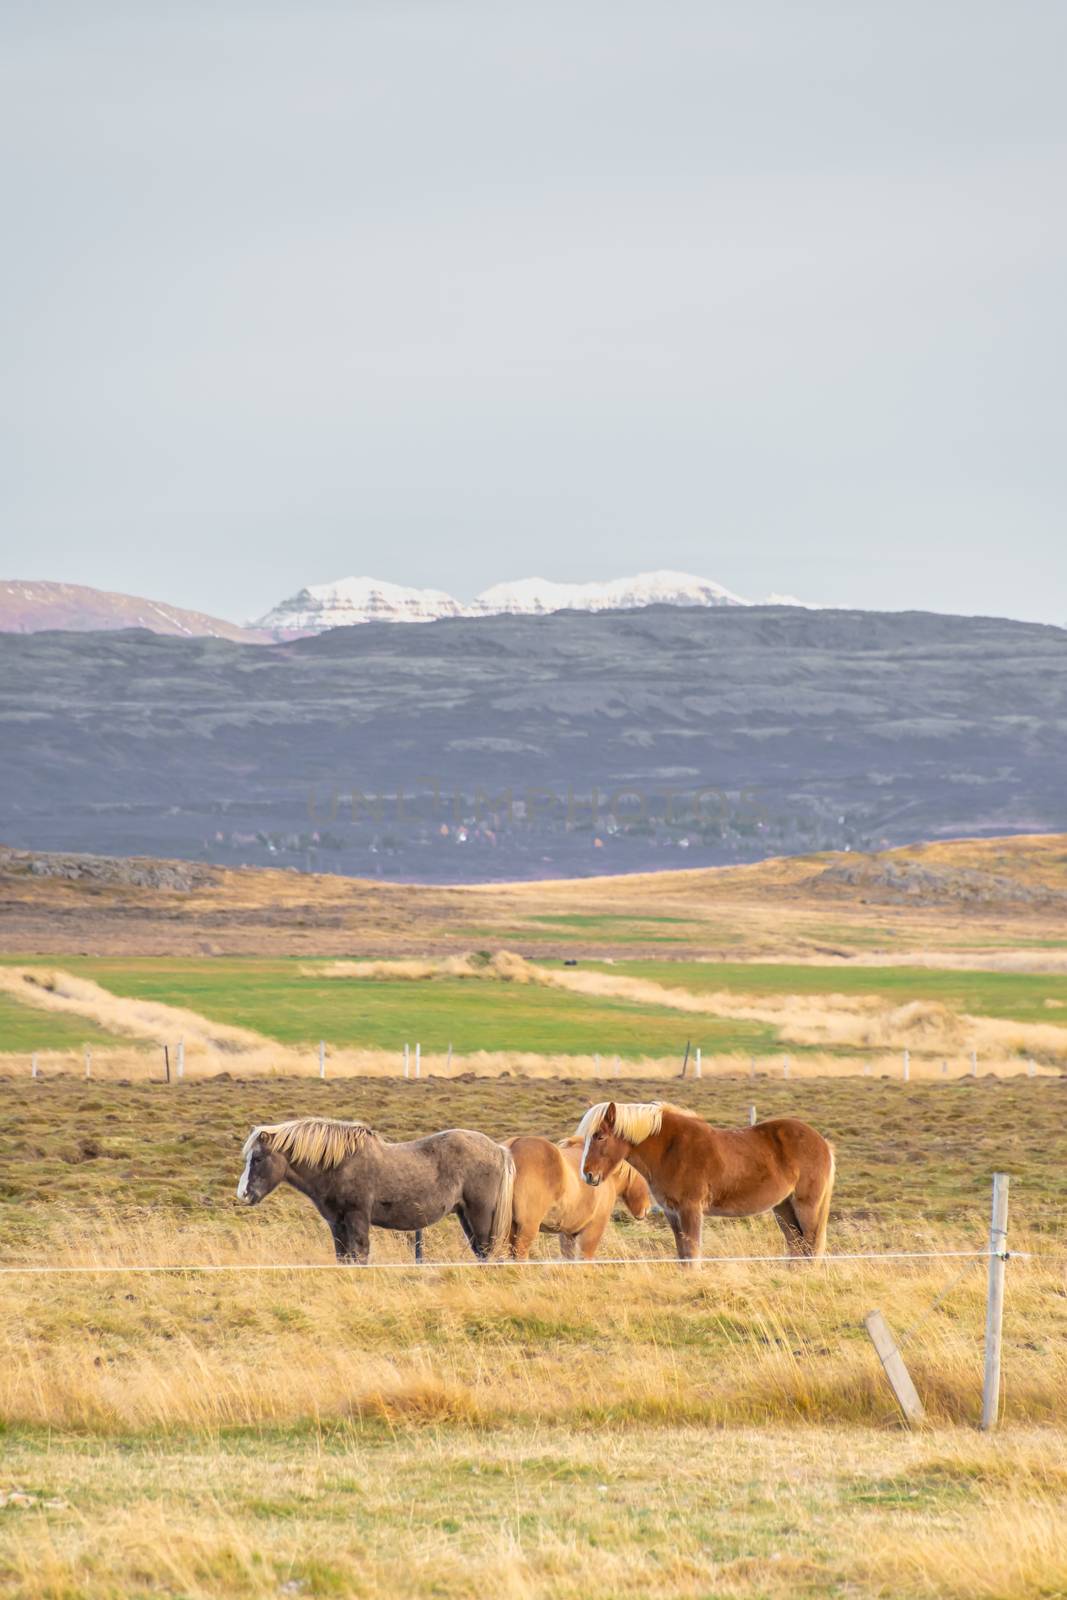 Snaefellsness national park in Iceland icelandic horses standing on meadow in front of big mountain range